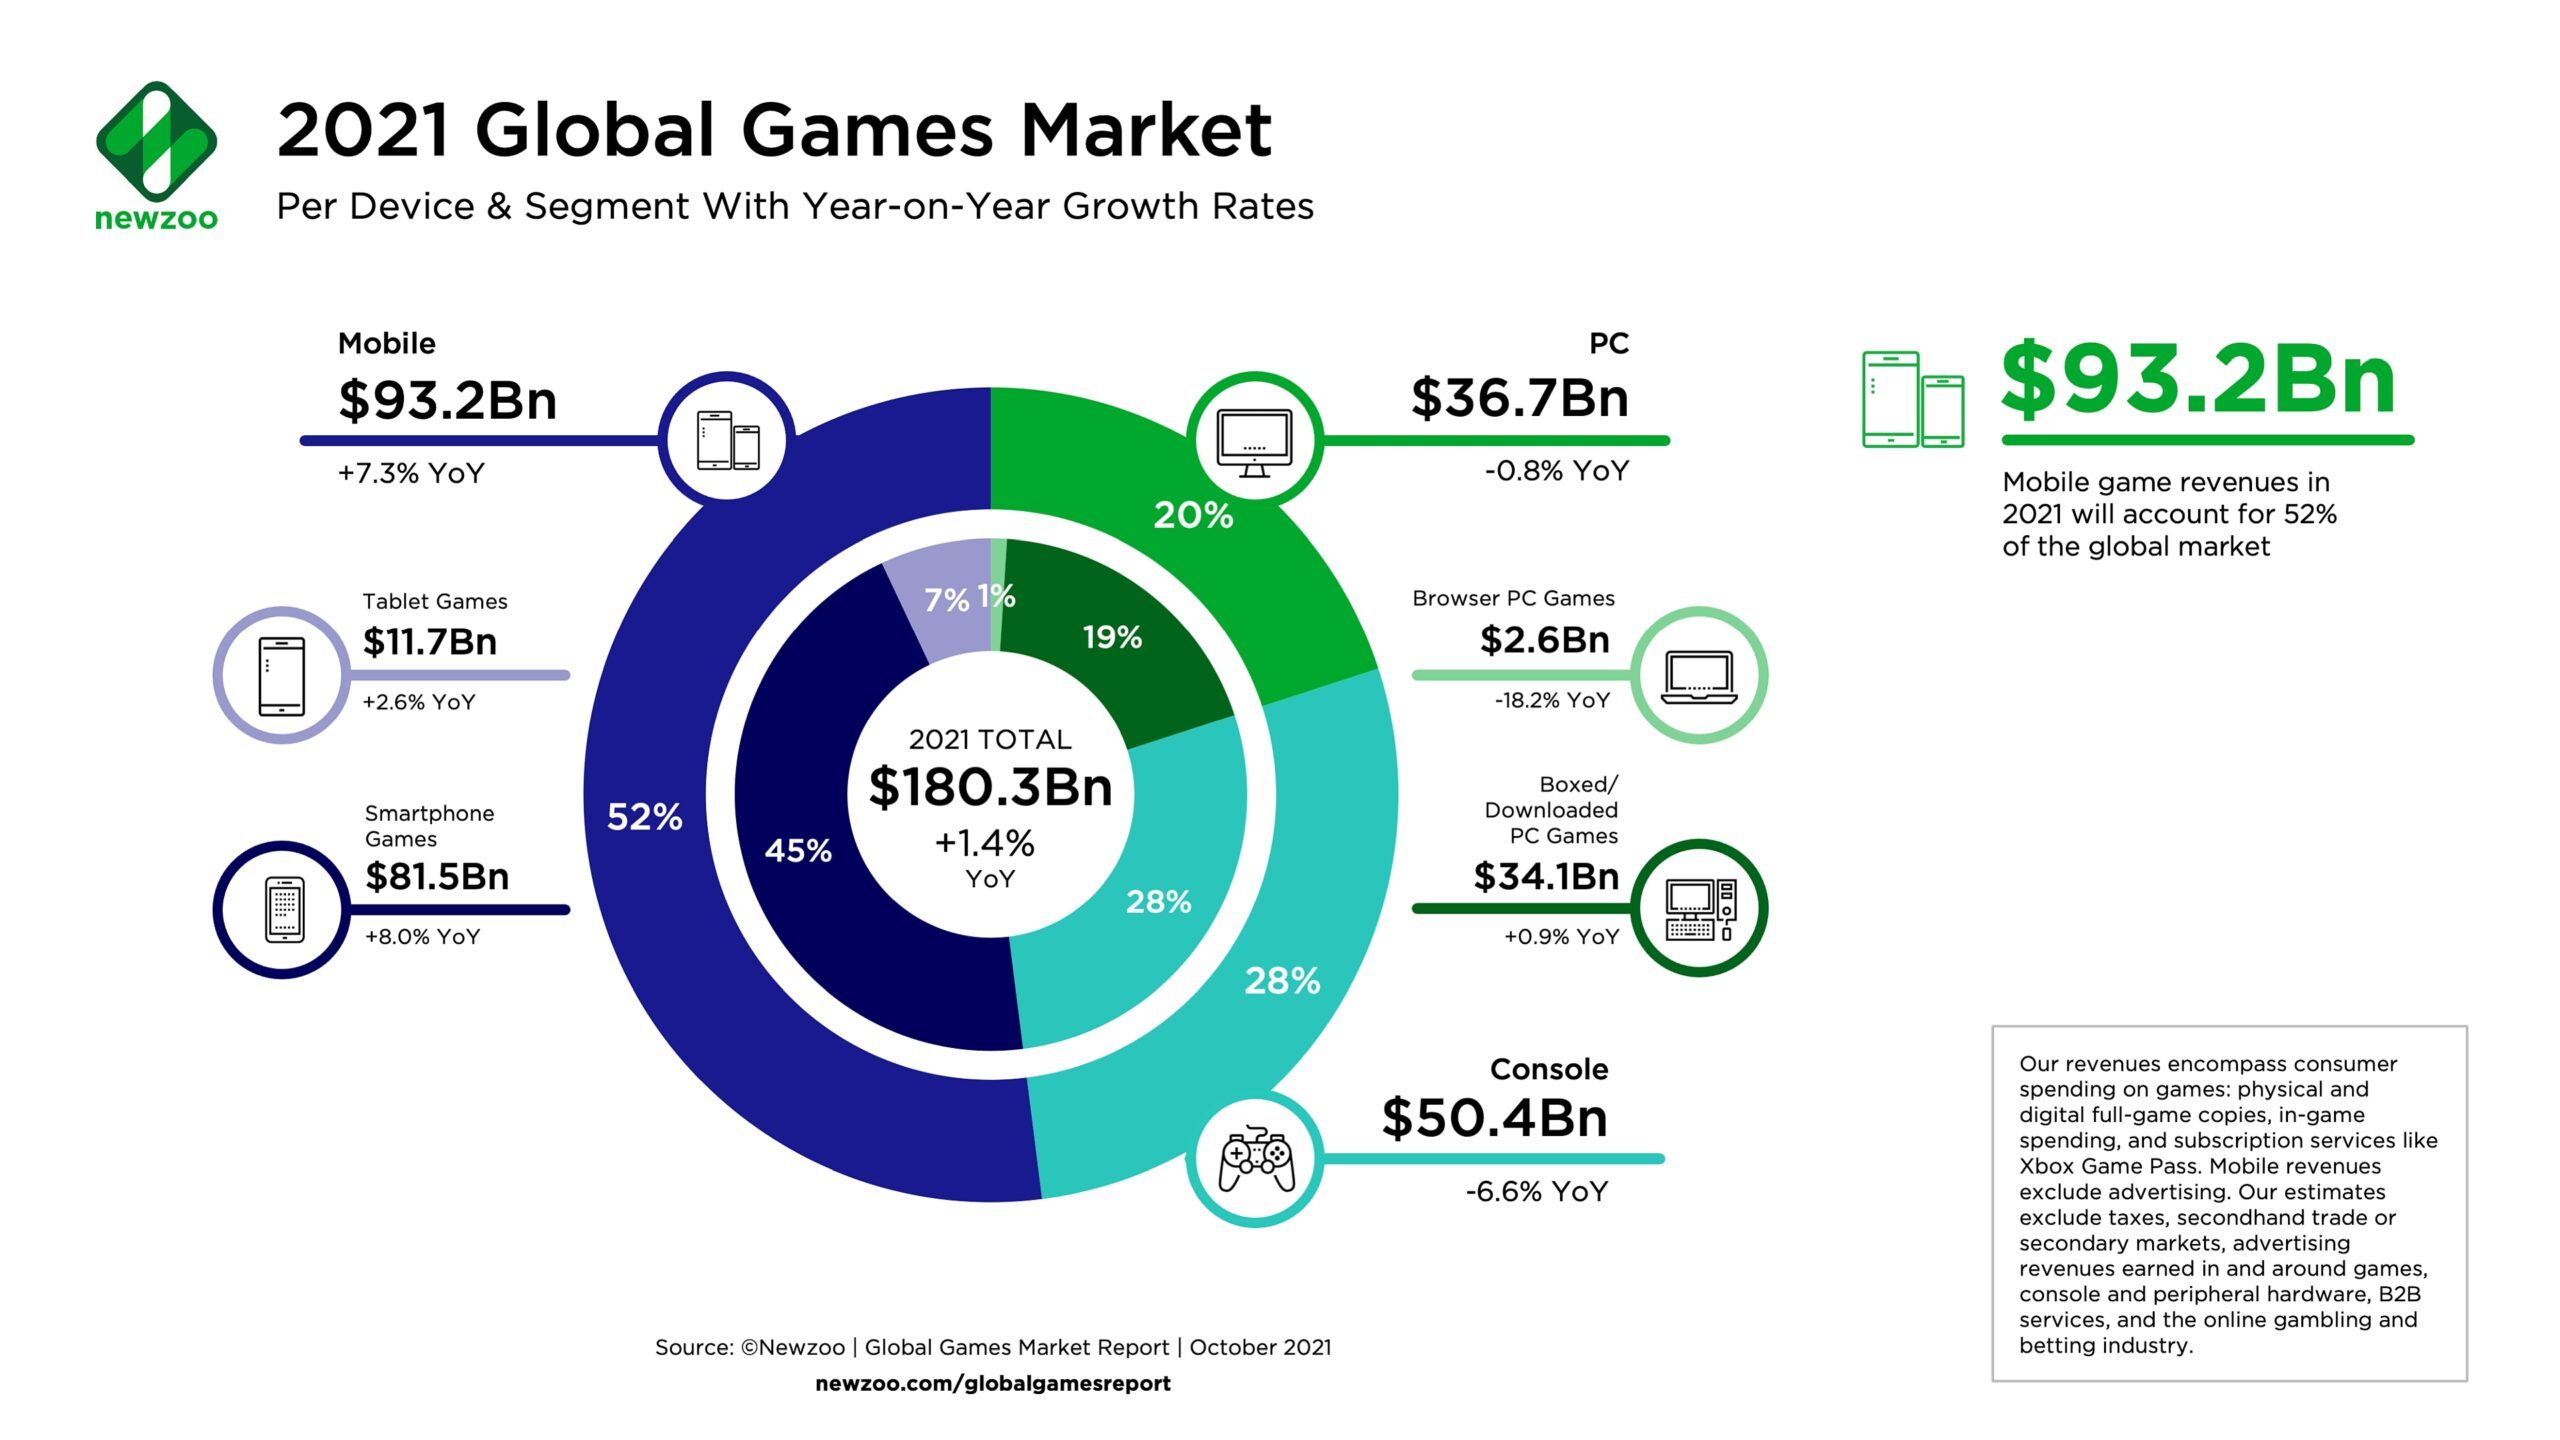 newzoo global games market 2021 by segment scaled